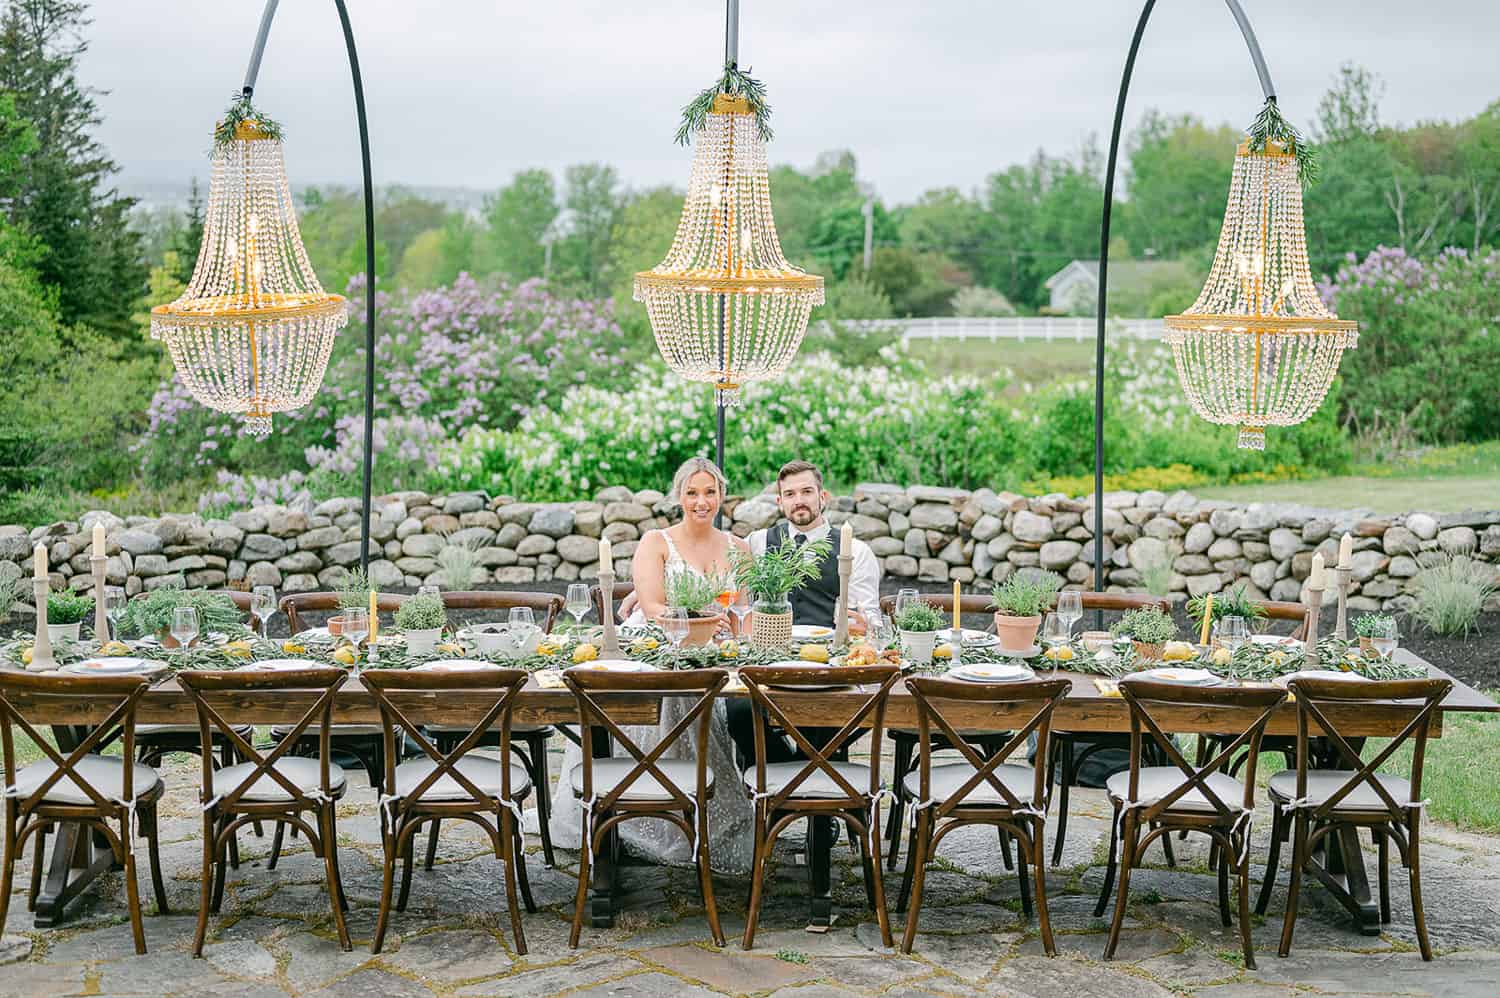 Bride and groom at an outdoor dining table with floral arrangements, under elegant chandelier lights, with a green backdrop.